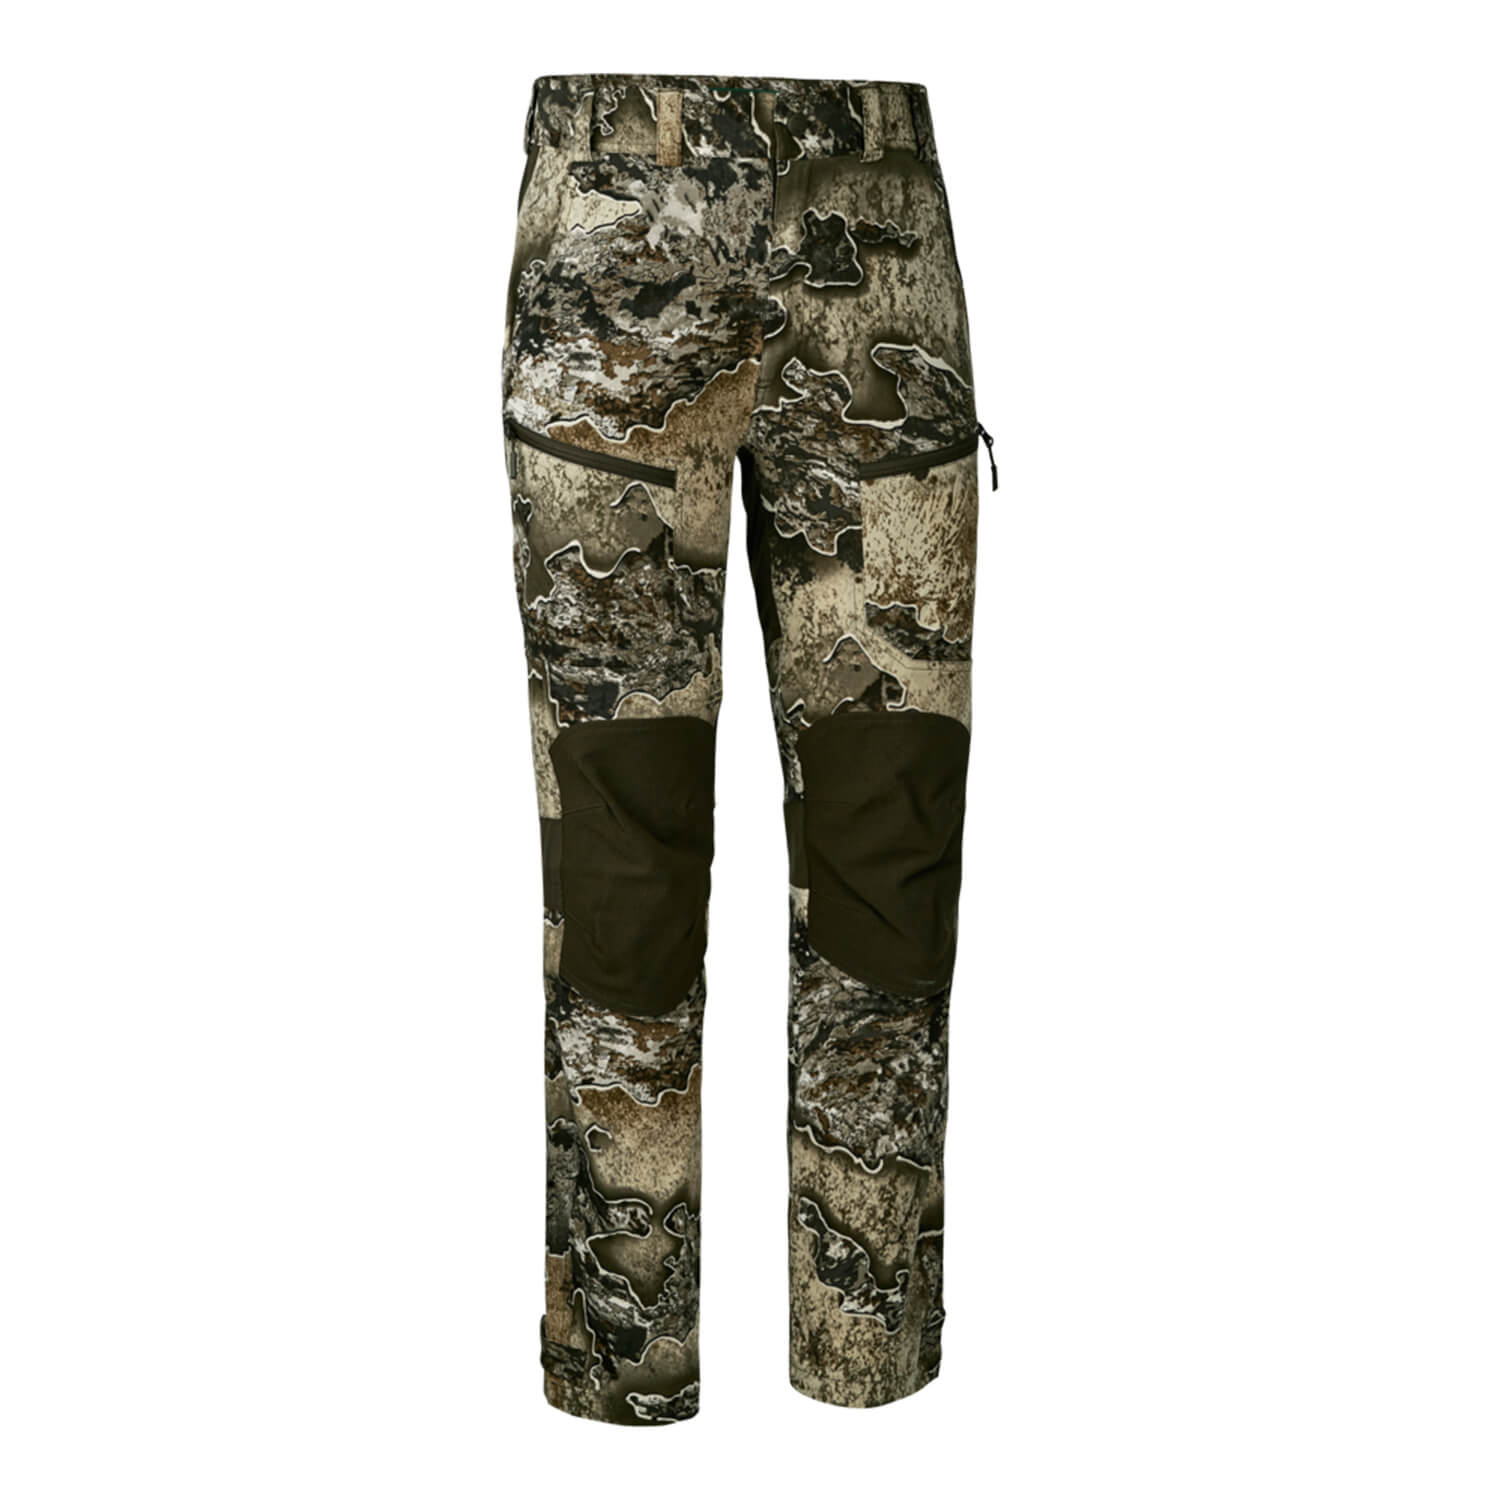 Deerhunter Trousers Excape Light (Realtree Excape) - Hunting Trousers